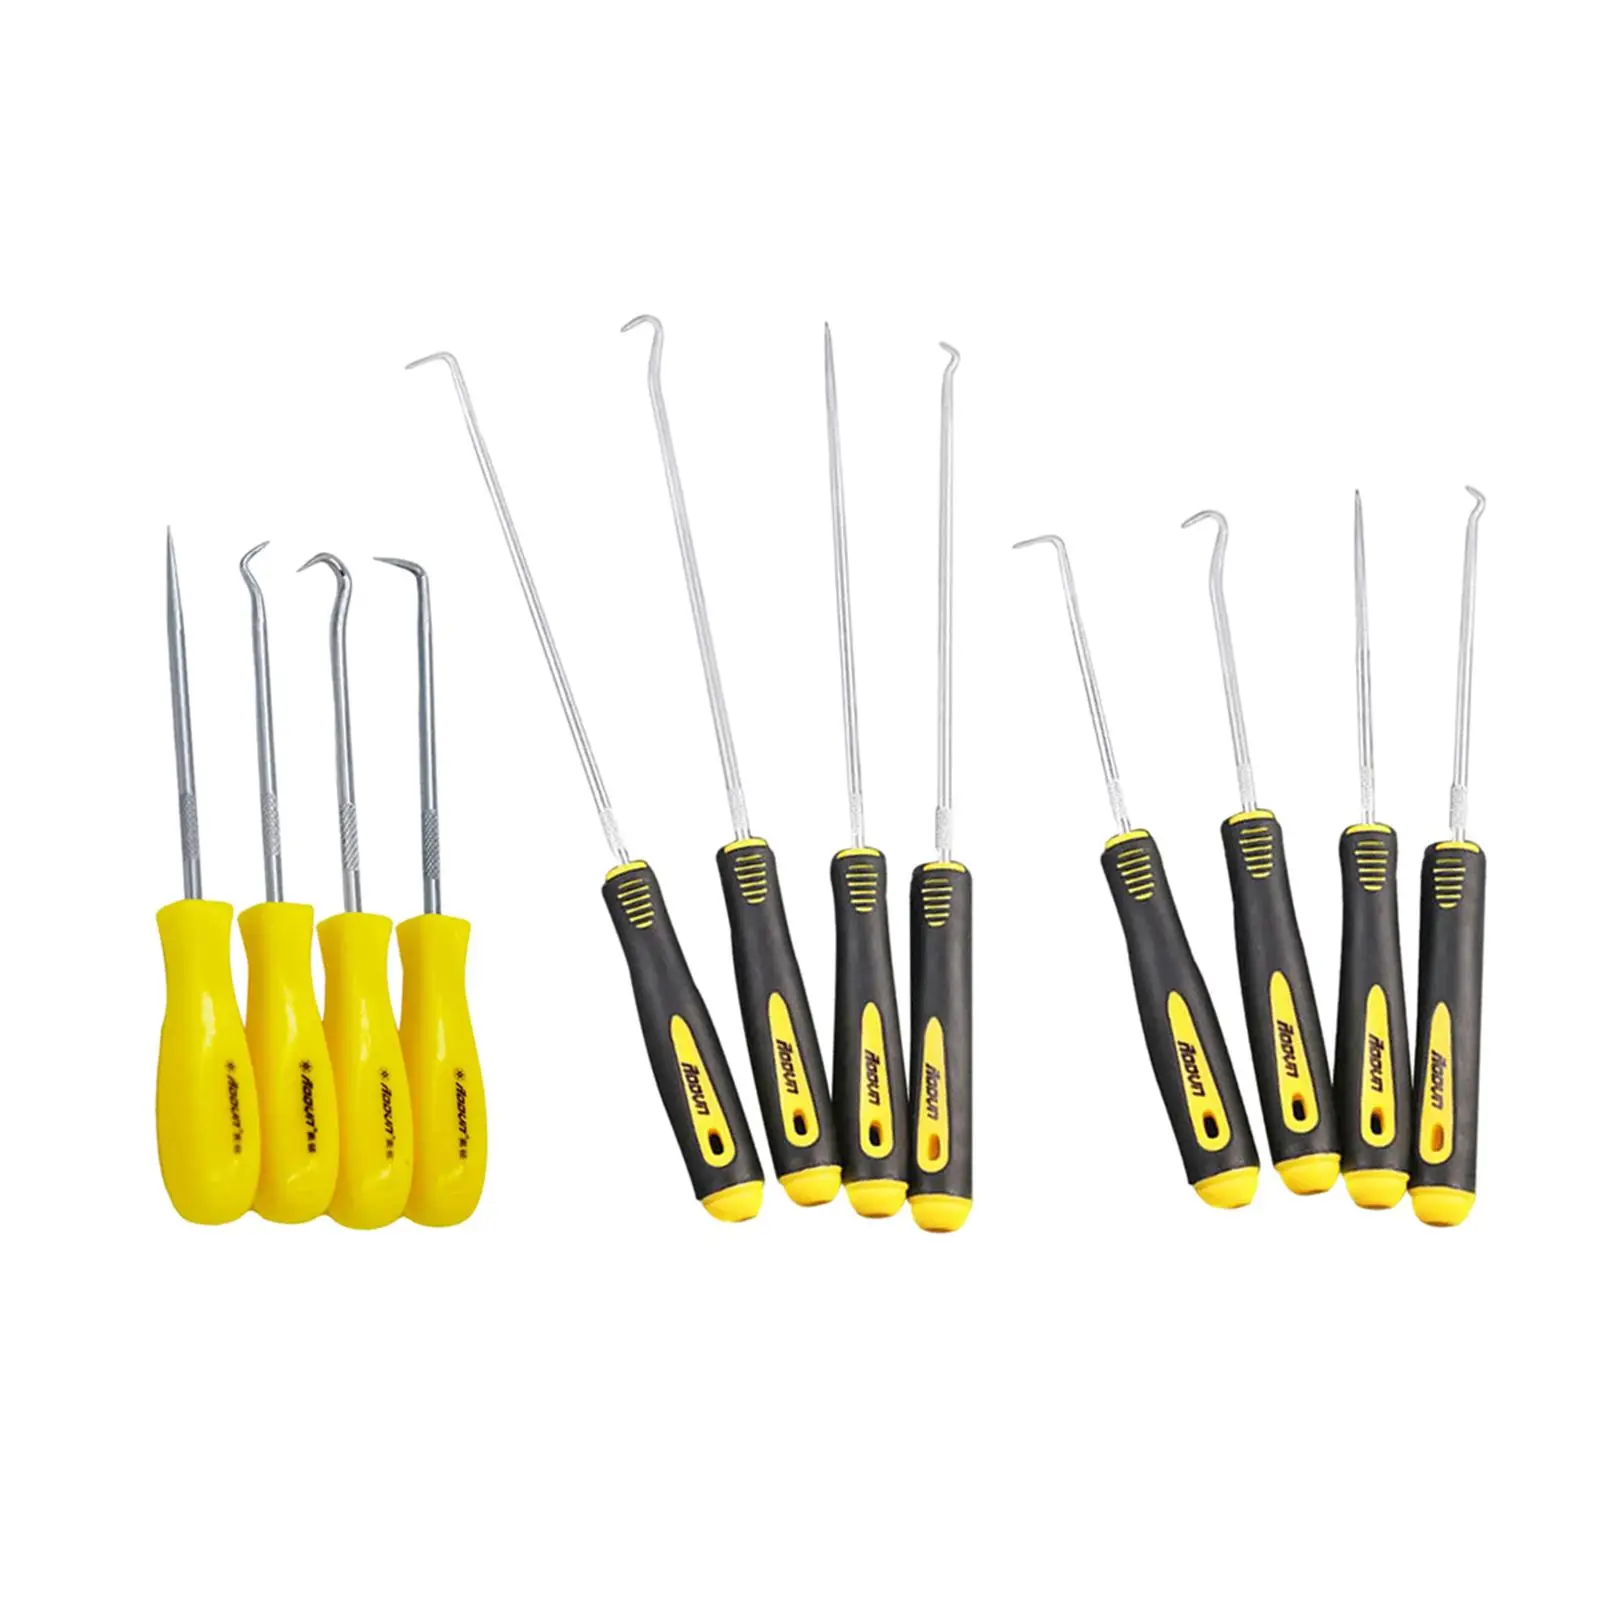 Oil Seal Remover Remover Removal Gasket Pick Pick Tool Pick Set for Home Car